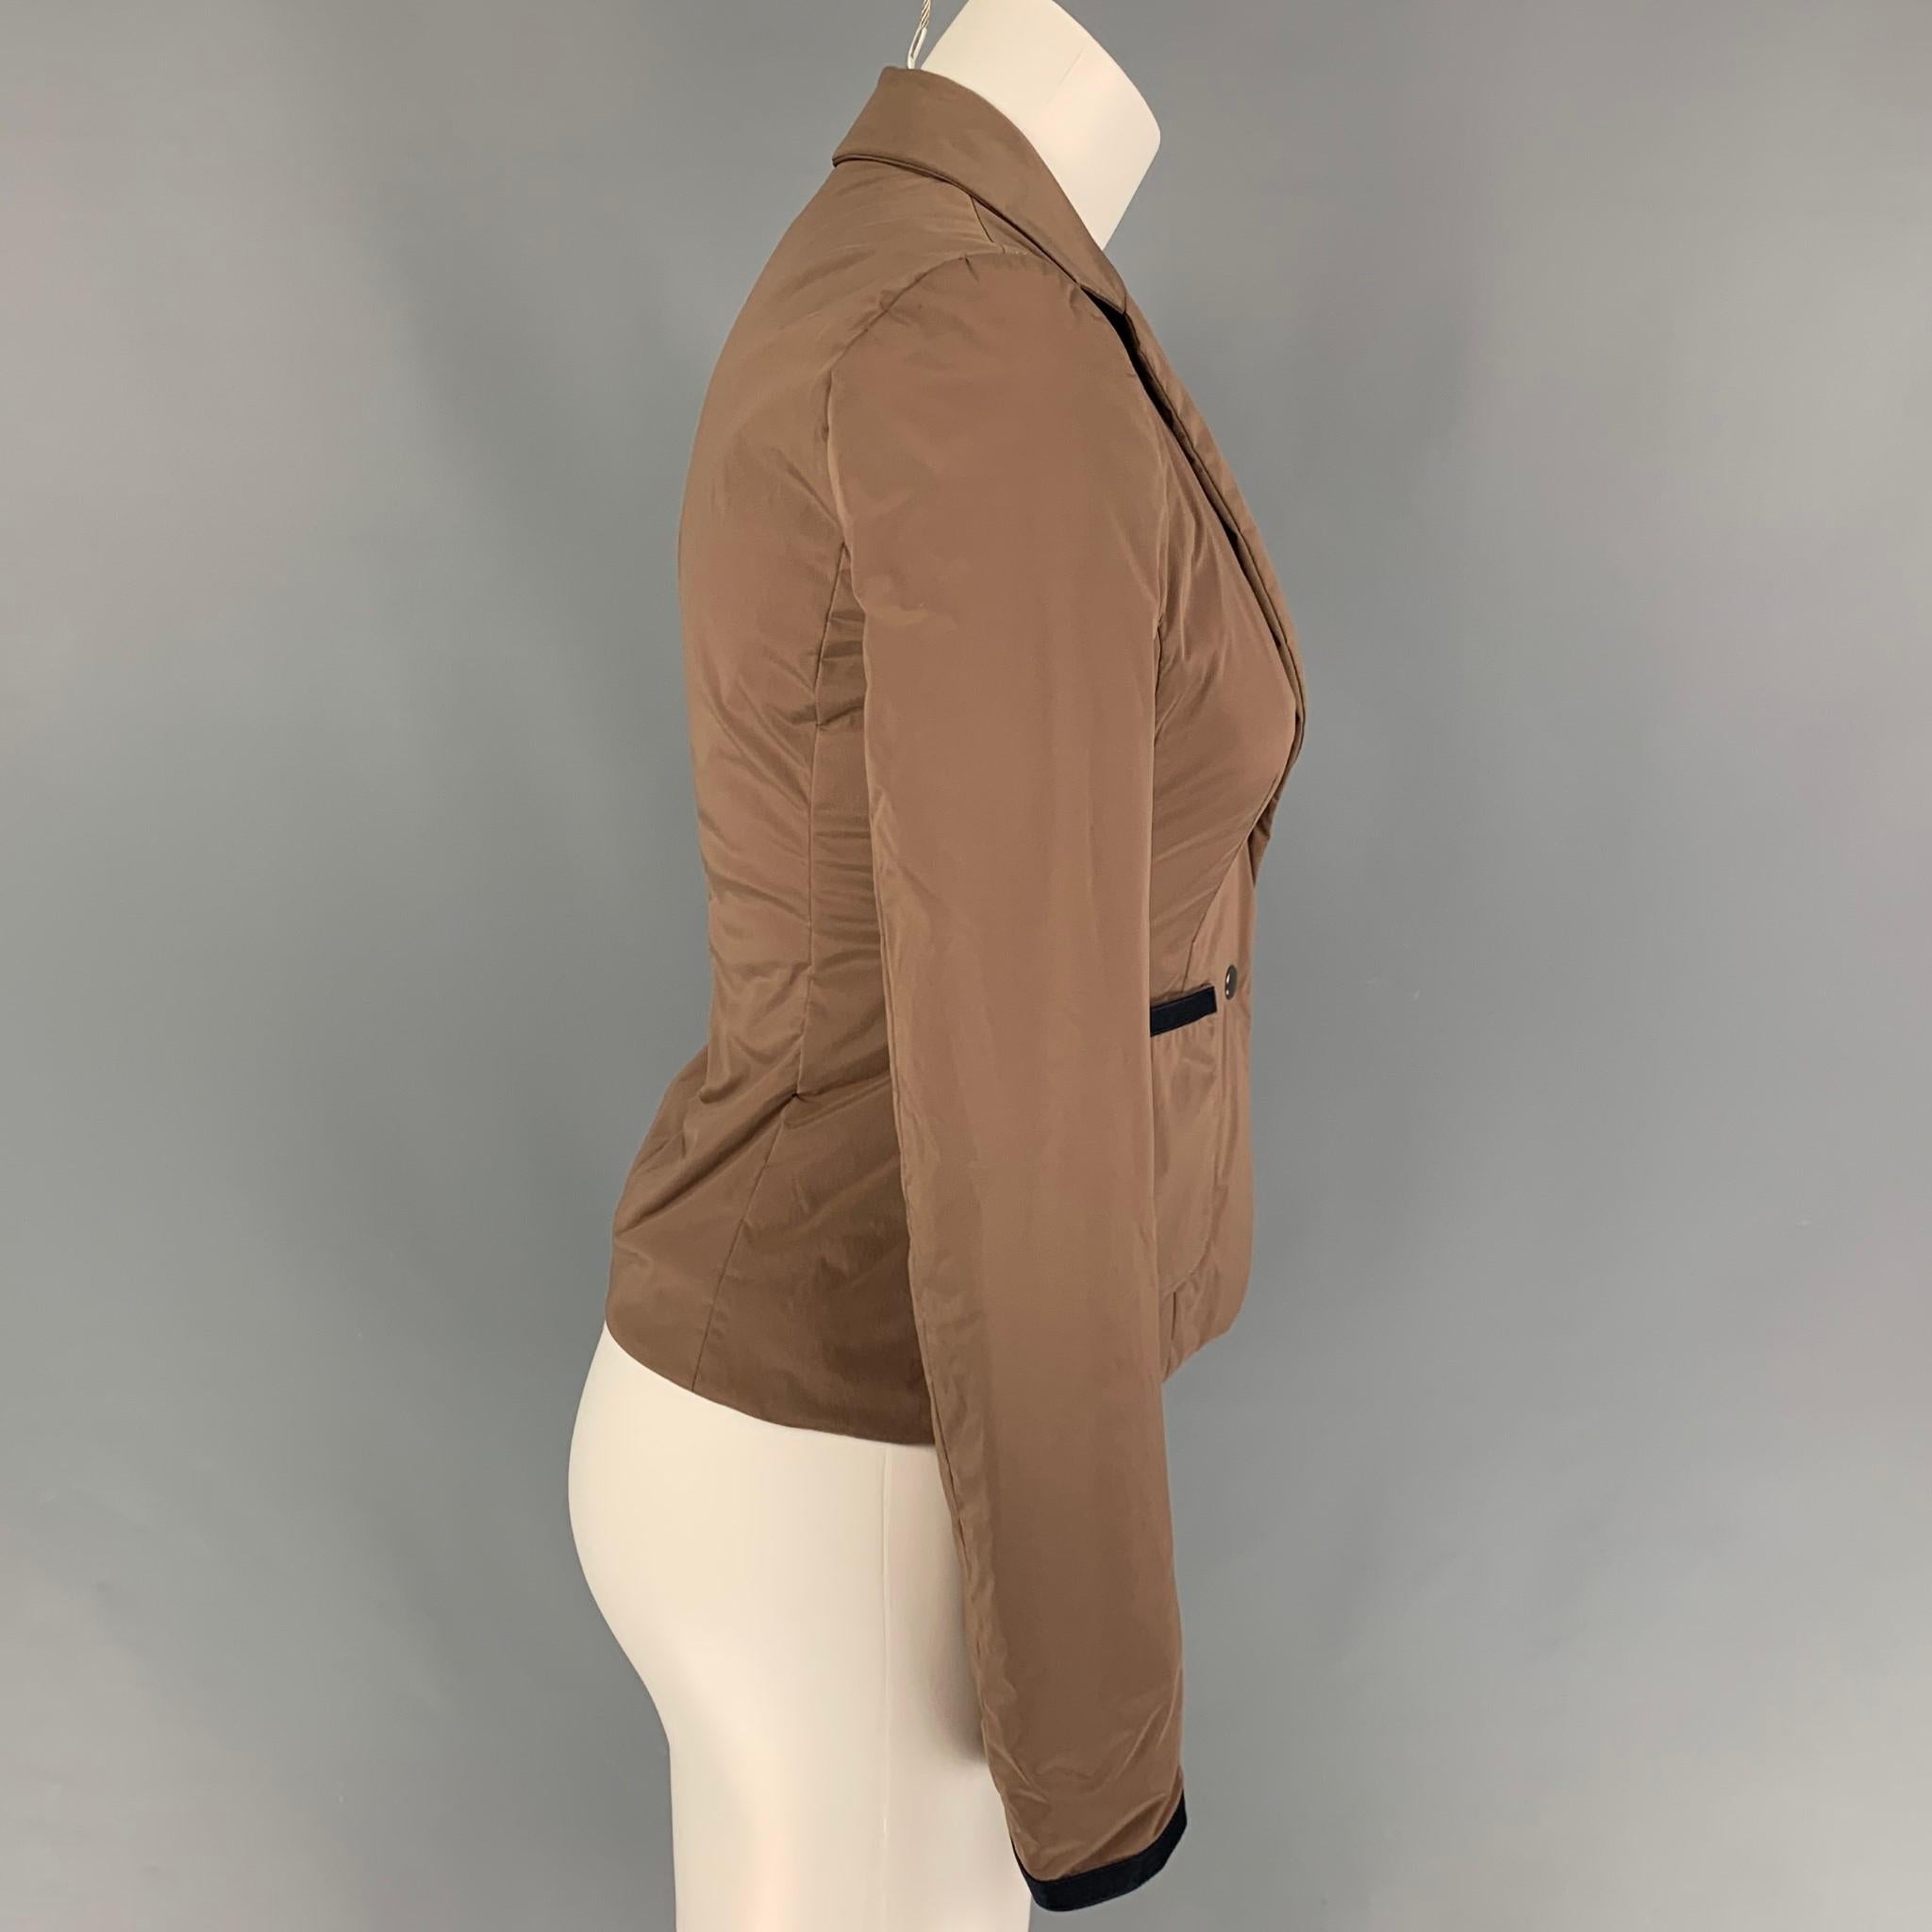 JIL SANDER NAVY blazer comes in a khaki polyamide blend featuring a notch lapel, patch pockets, and a two snap button closure. Made in Italy. 

Very Good Pre-Owned Condition.
Marked: 34

Measurements:

Shoulder: 14.5 in.
Bust: 32 in.
Sleeve: 24.5